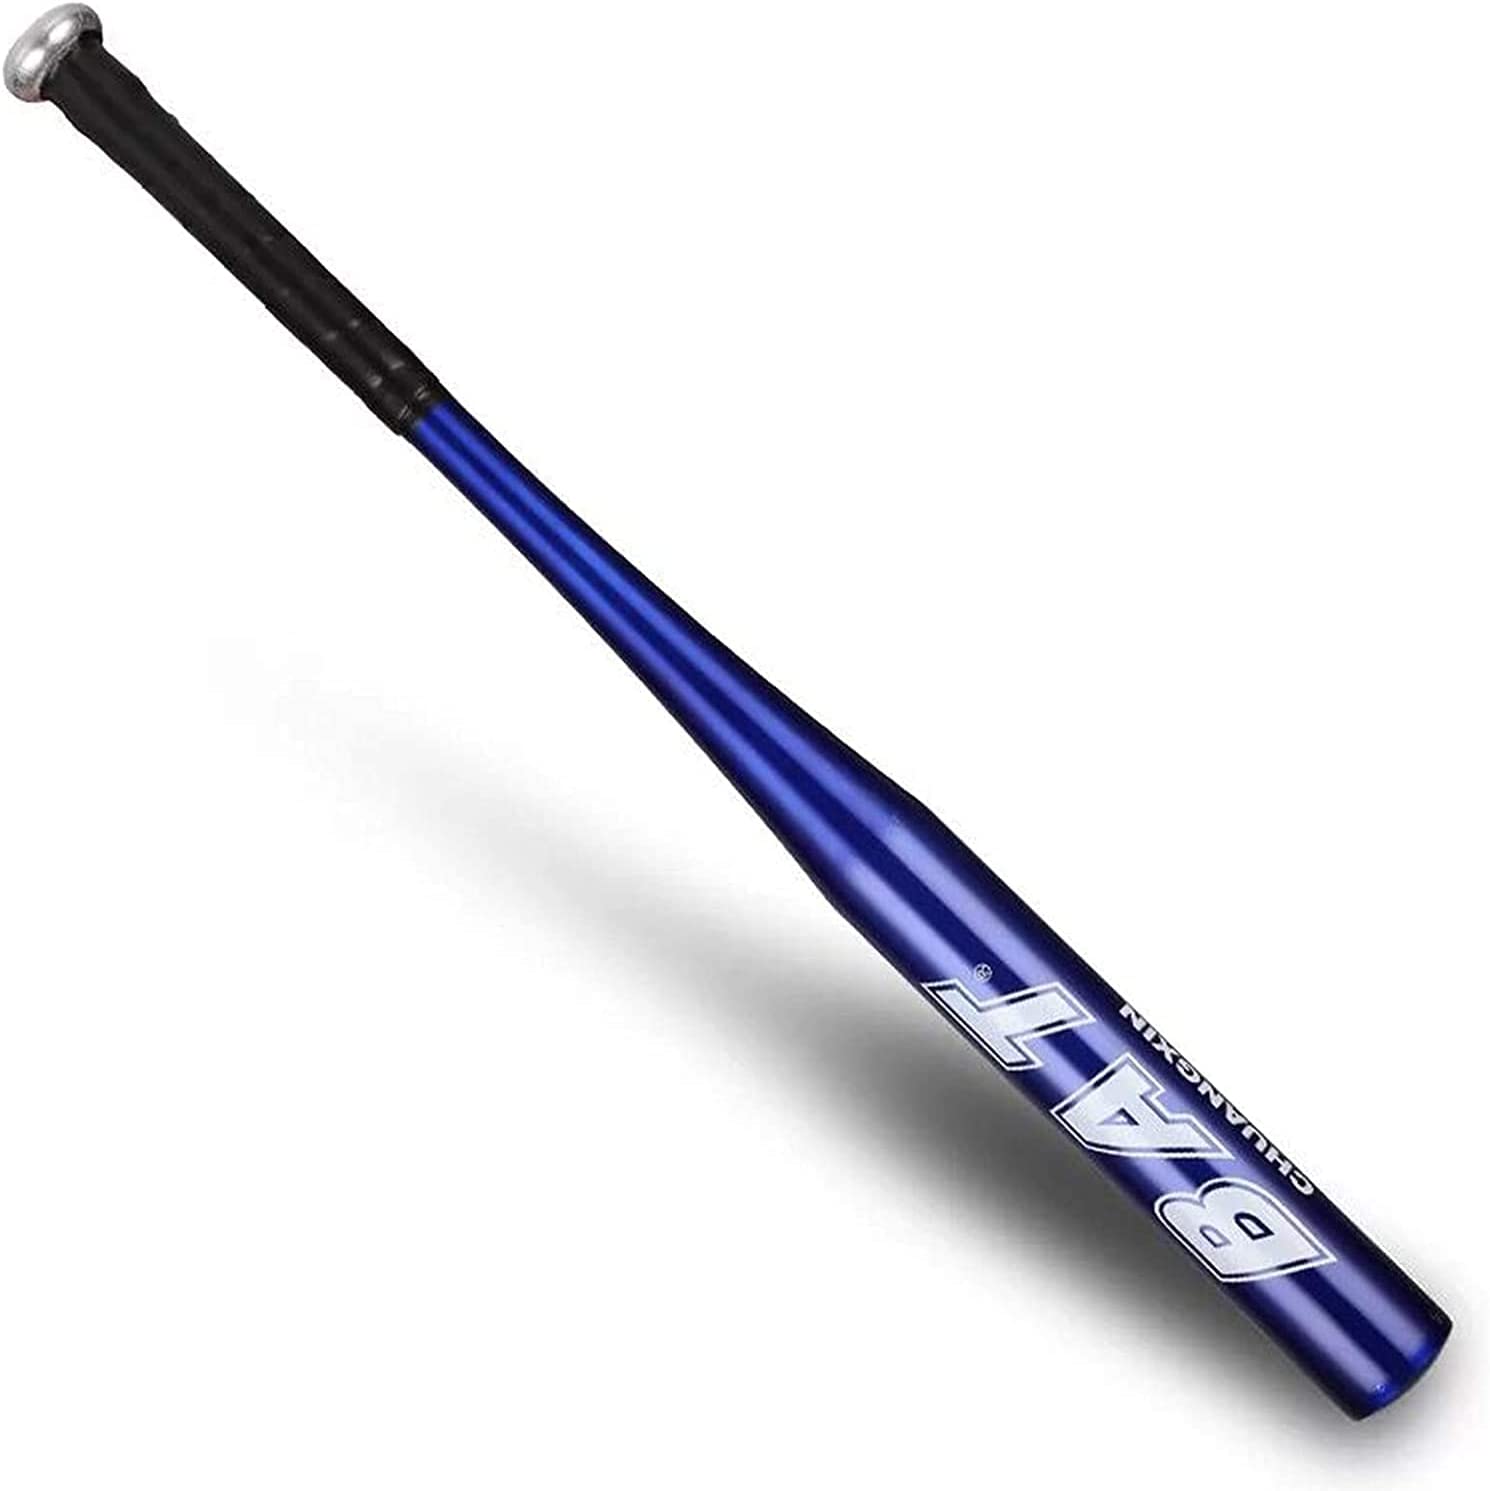 desillusion Bakterie radikal Buy ULTIMAX Baseball bat with Lightweight Aluminum Alloy, Lightweight Self  Defense Softball Bat for Youth Adult Outdoor Sport Training and Practice-  Multi Color (30 Inch) Online in UAE | Sharaf DG